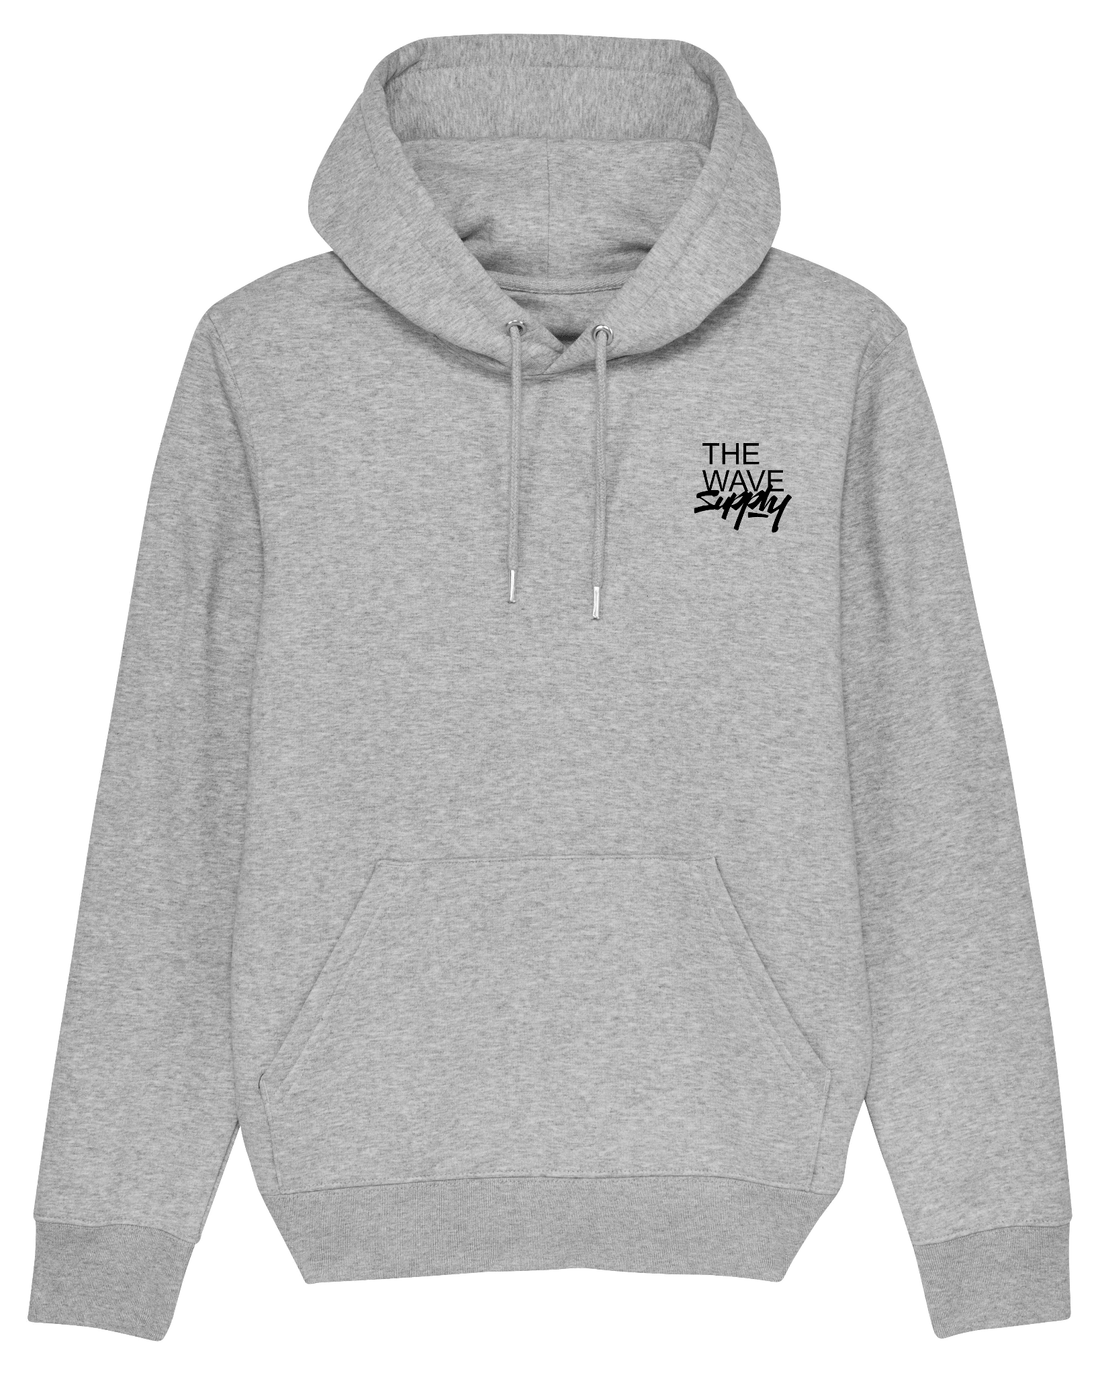 Grey Skater Hoodie, Catch The Wave Grey Front Print